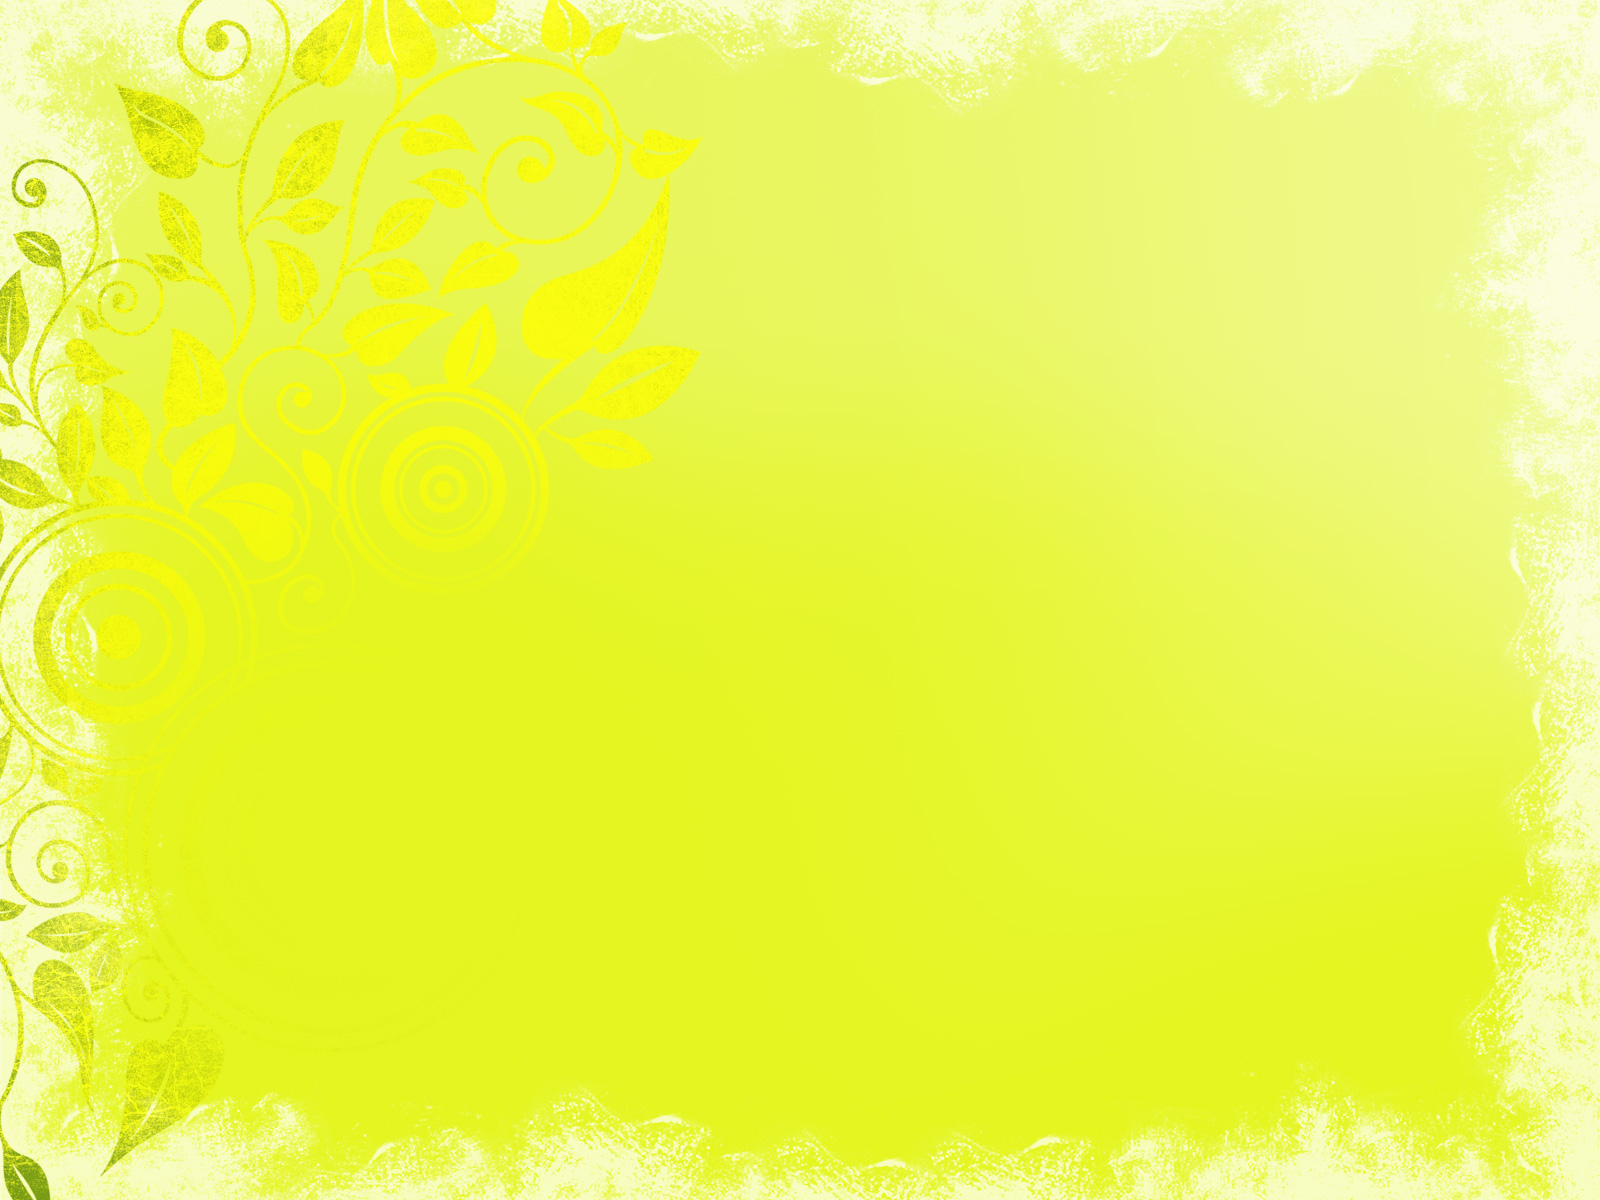 Yellow Ornament PPT Backgrounds